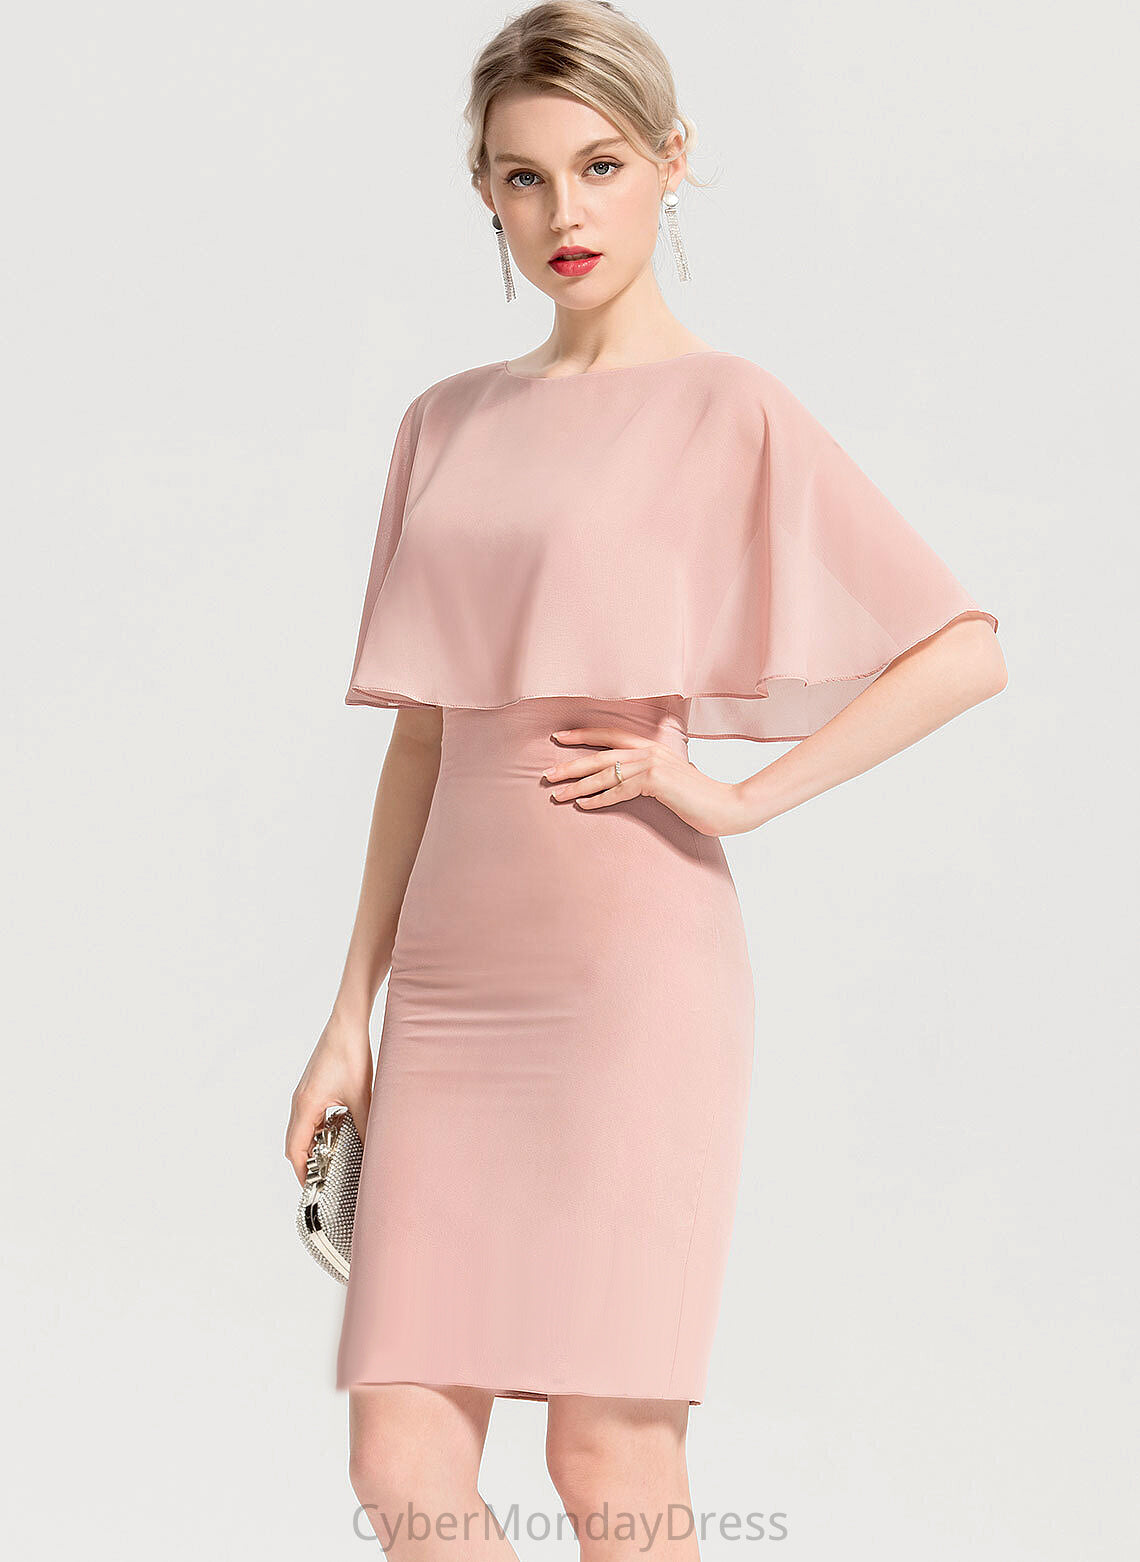 Chiffon Sheath/Column Dress Catalina Scoop Ruffles With Knee-Length Cocktail Neck Cascading Cocktail Dresses